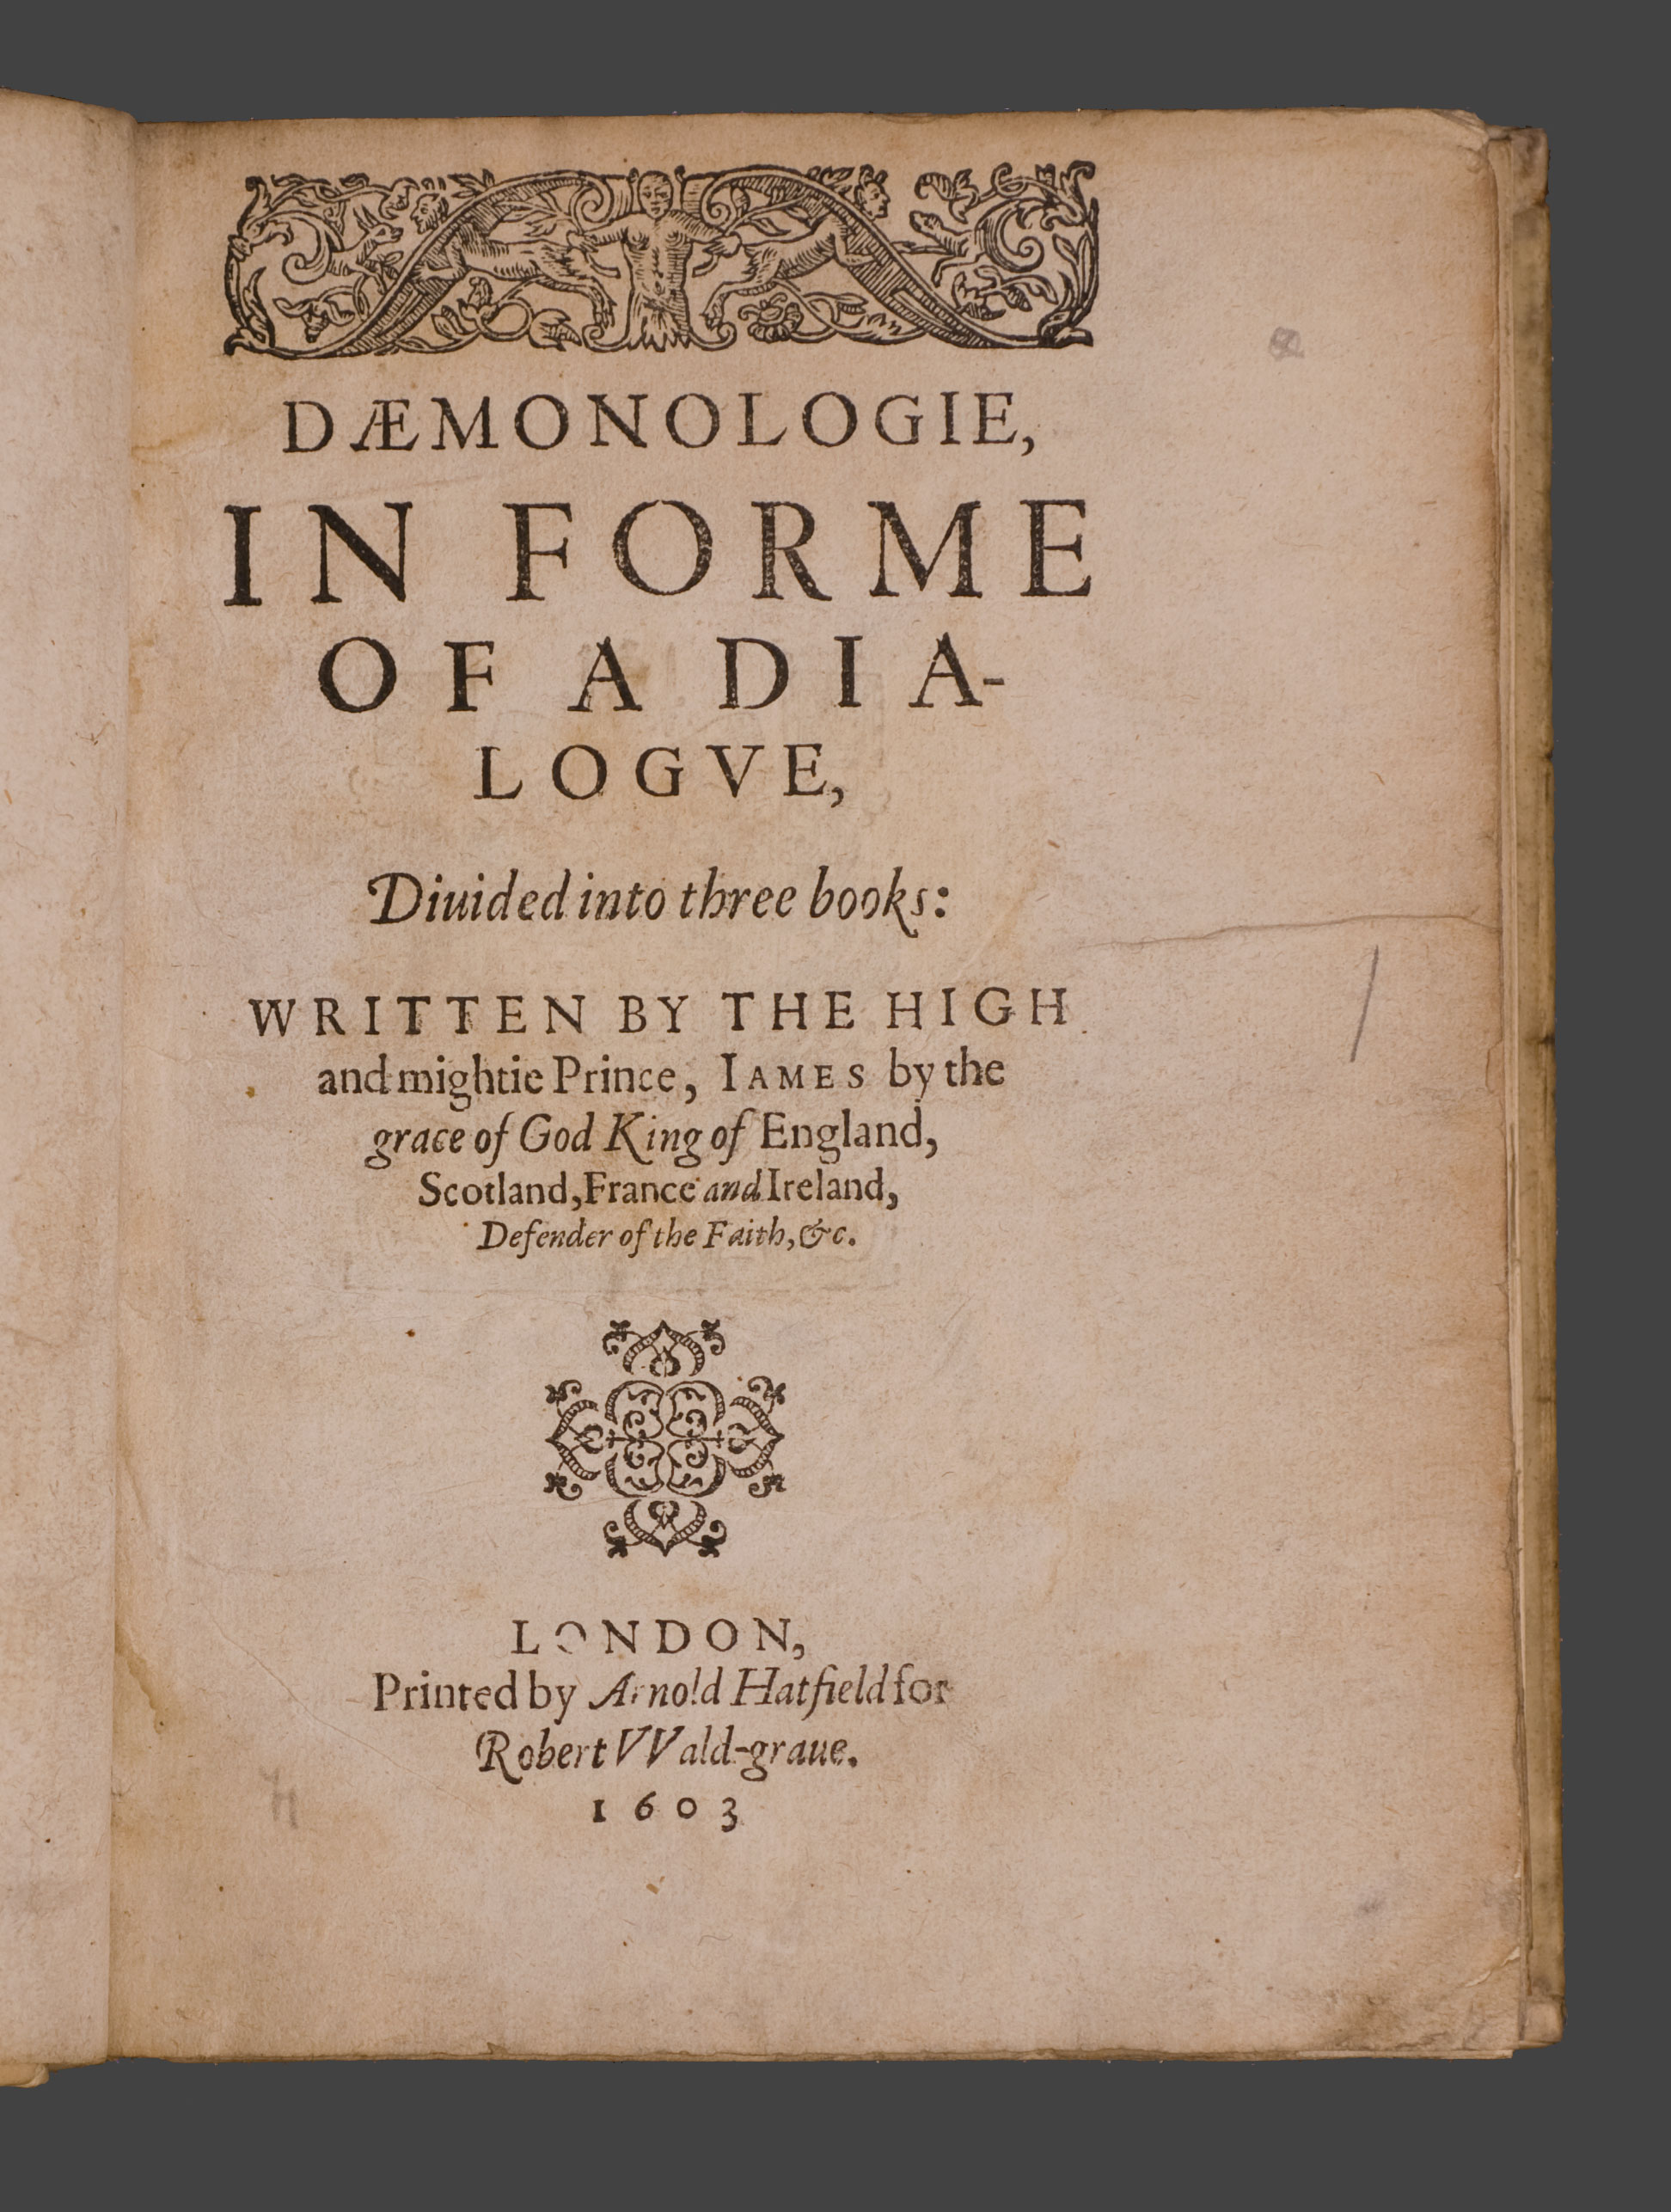 The title page from James VI and I, Daemonologie (London, 1603). The work was first printed in Edinburgh six years earlier.